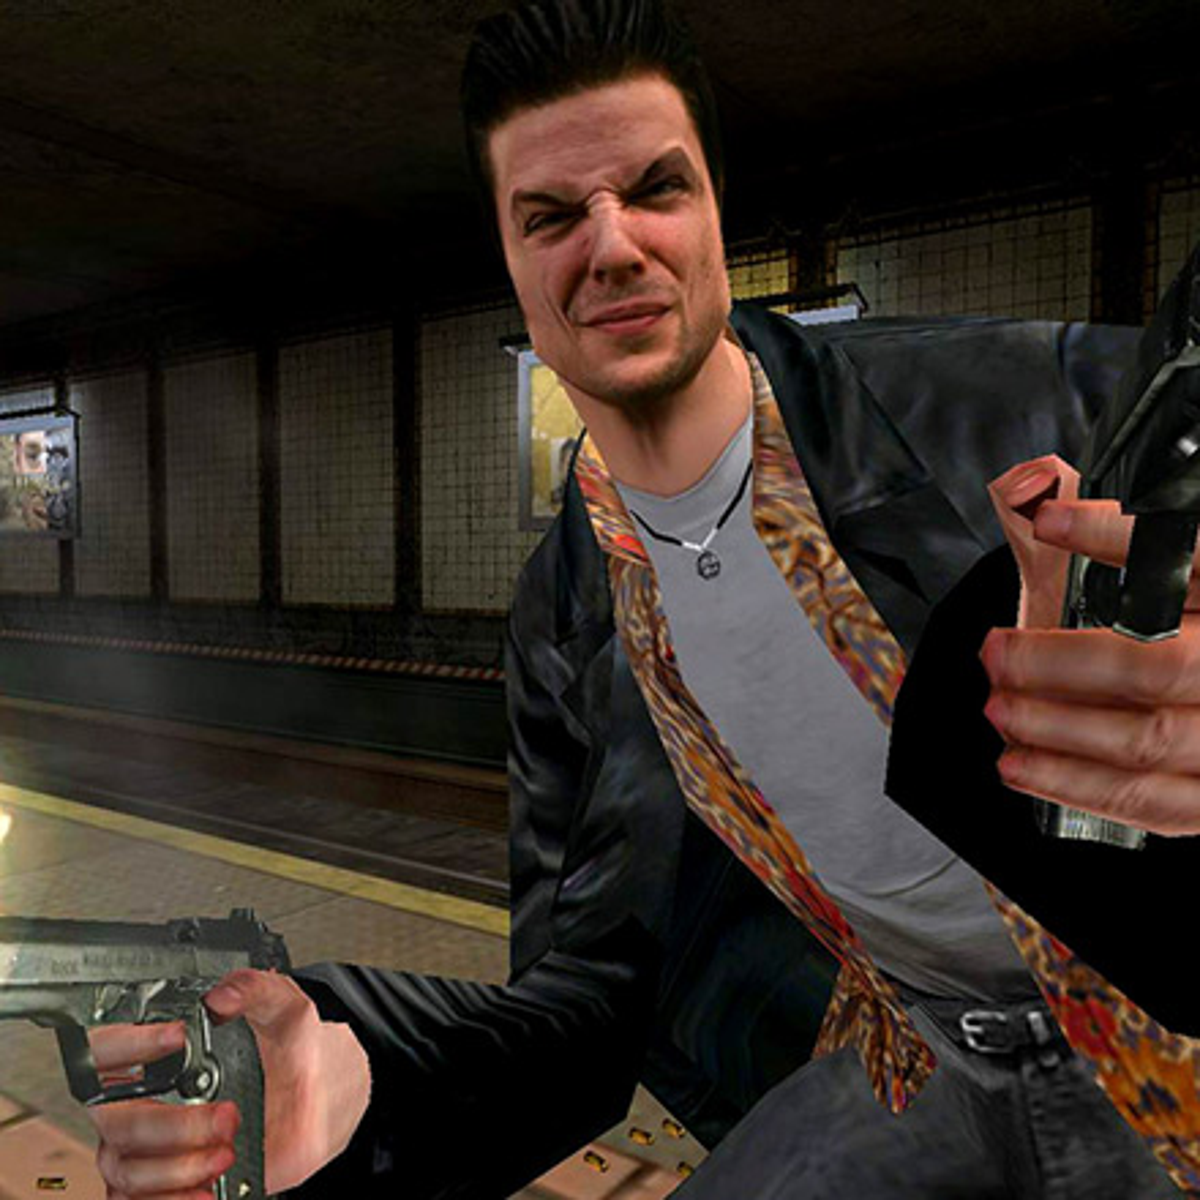 Max Payne rating leaked for PS4